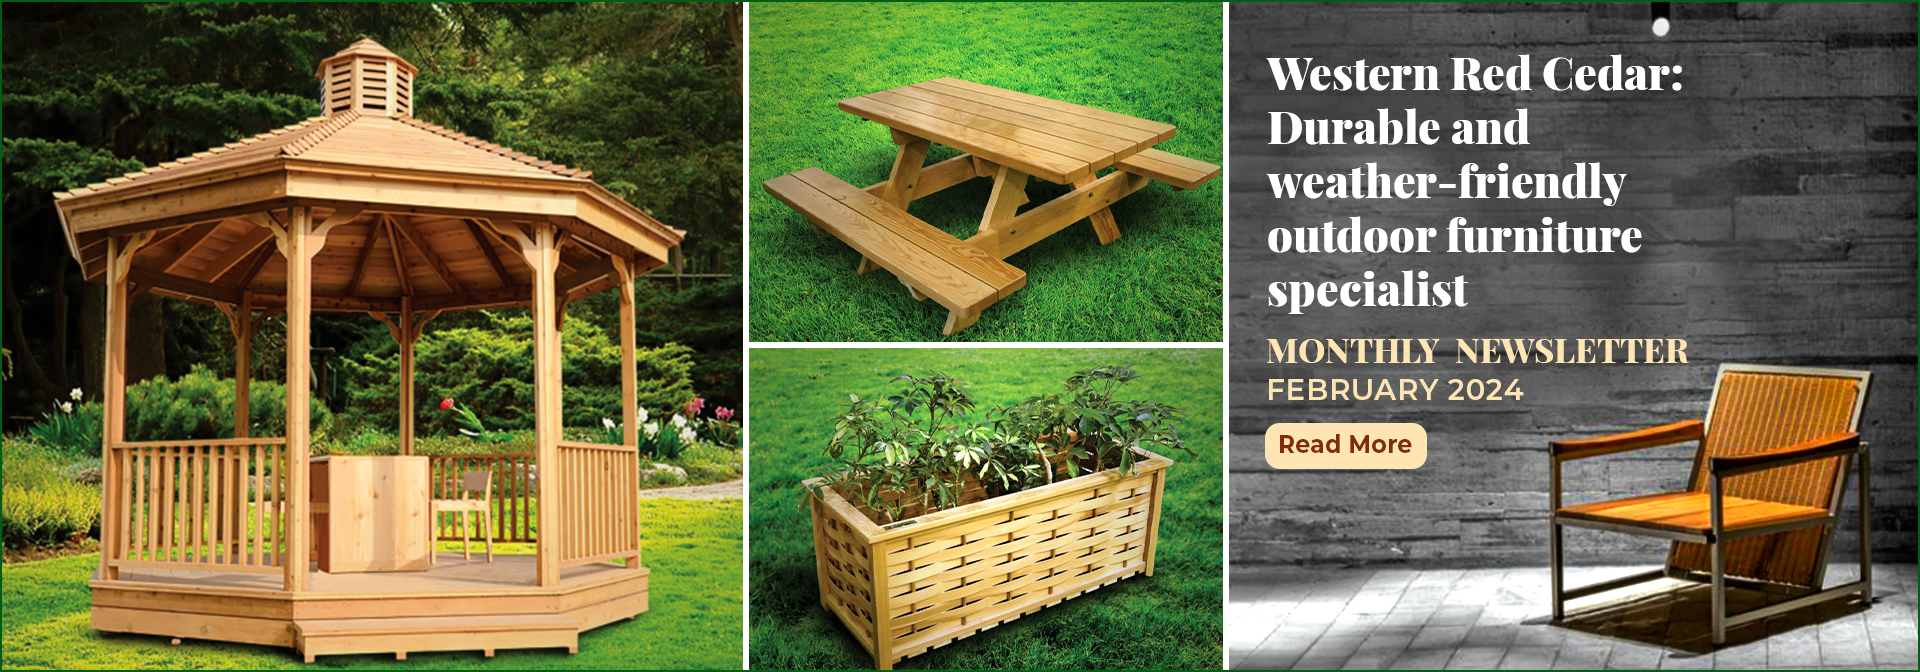 Western Red Cedar Durable And Weather-friendly Outdoor Furniture Specialist